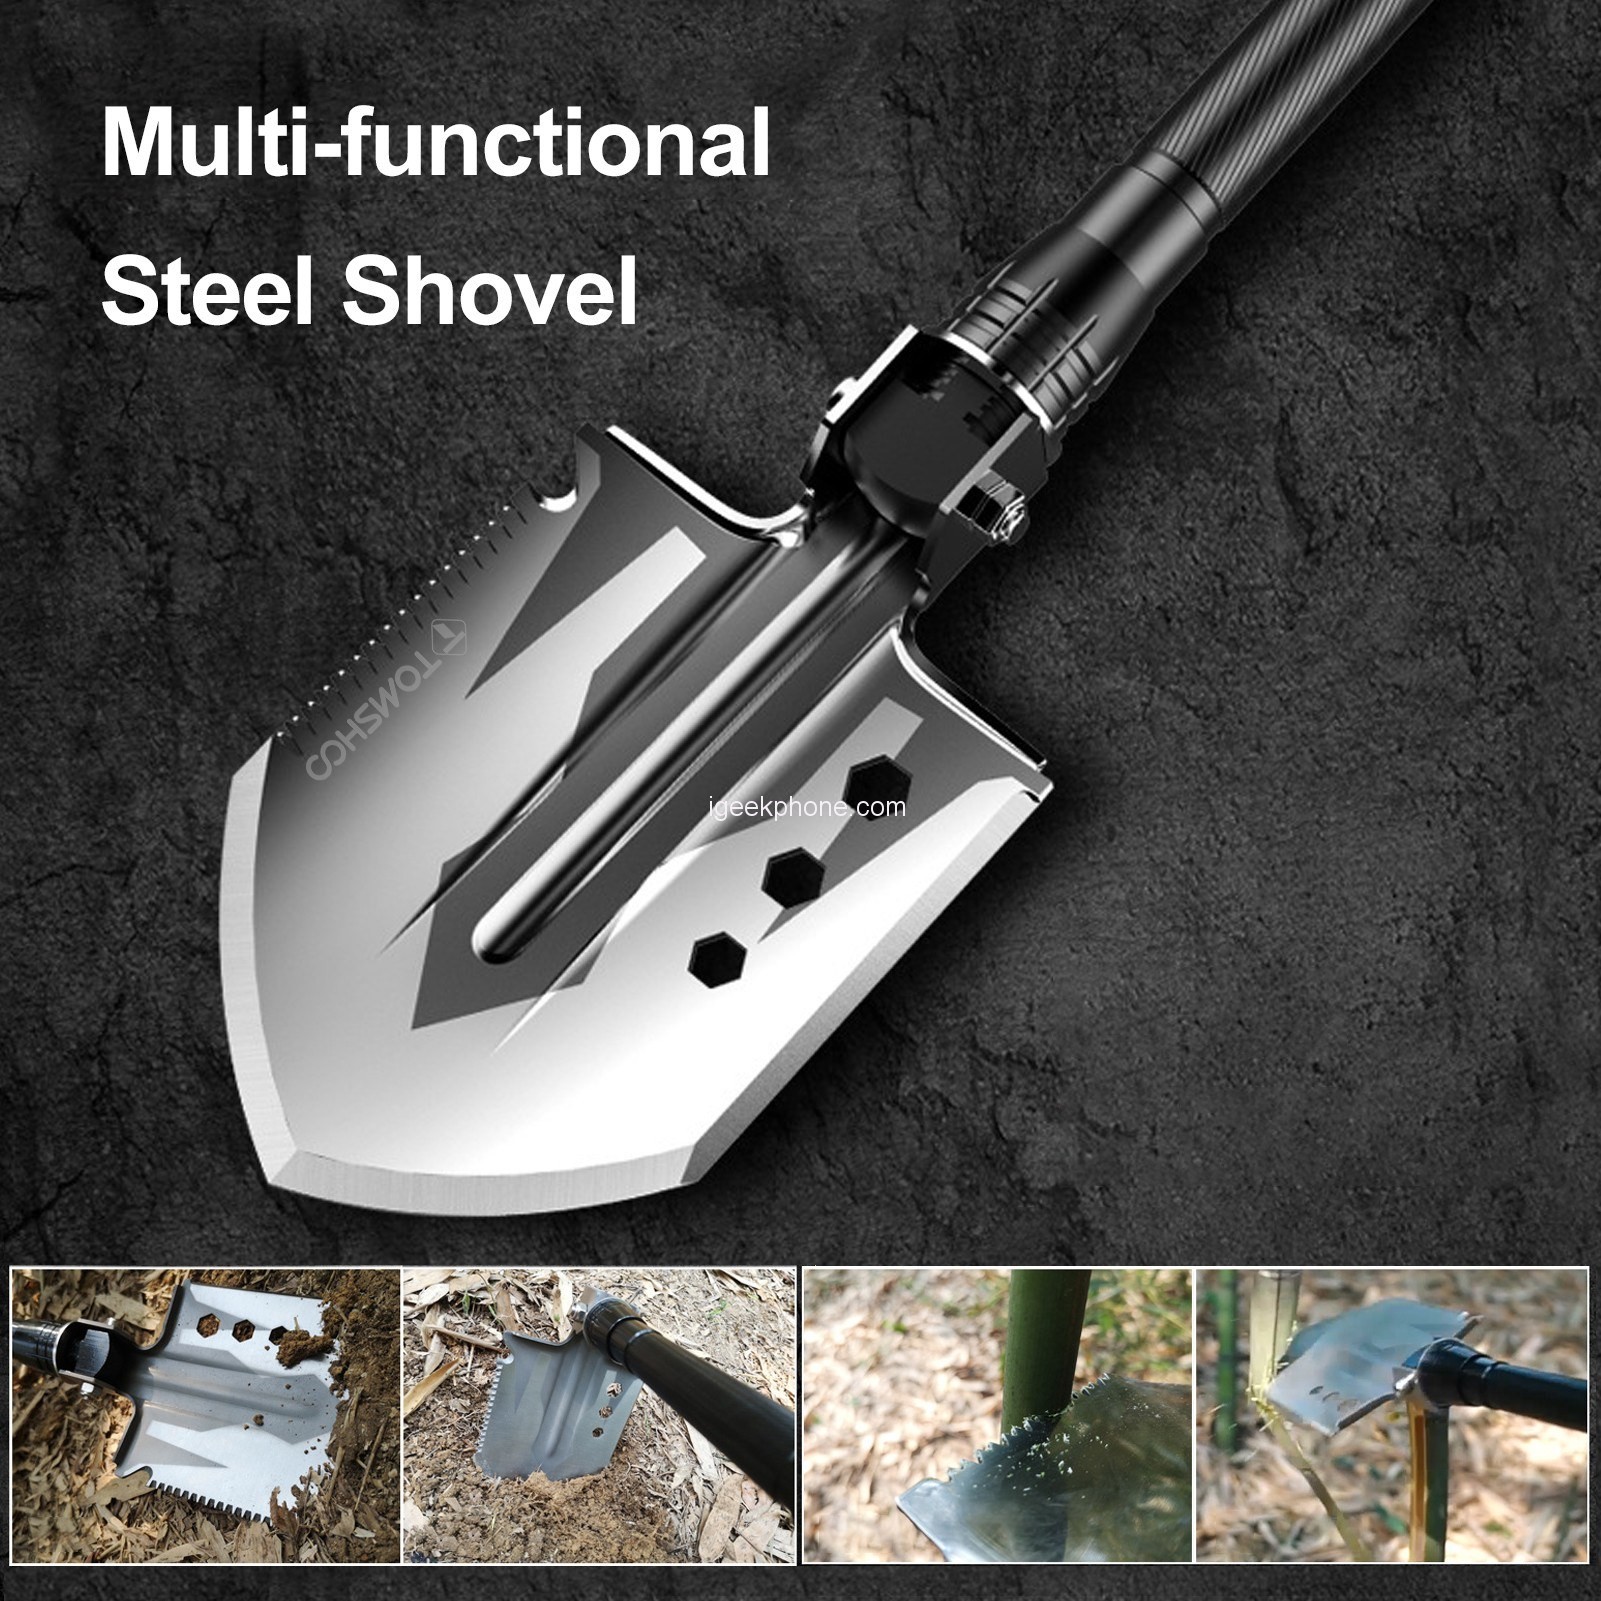 TOMSHOO Folding Camping Shovel Features